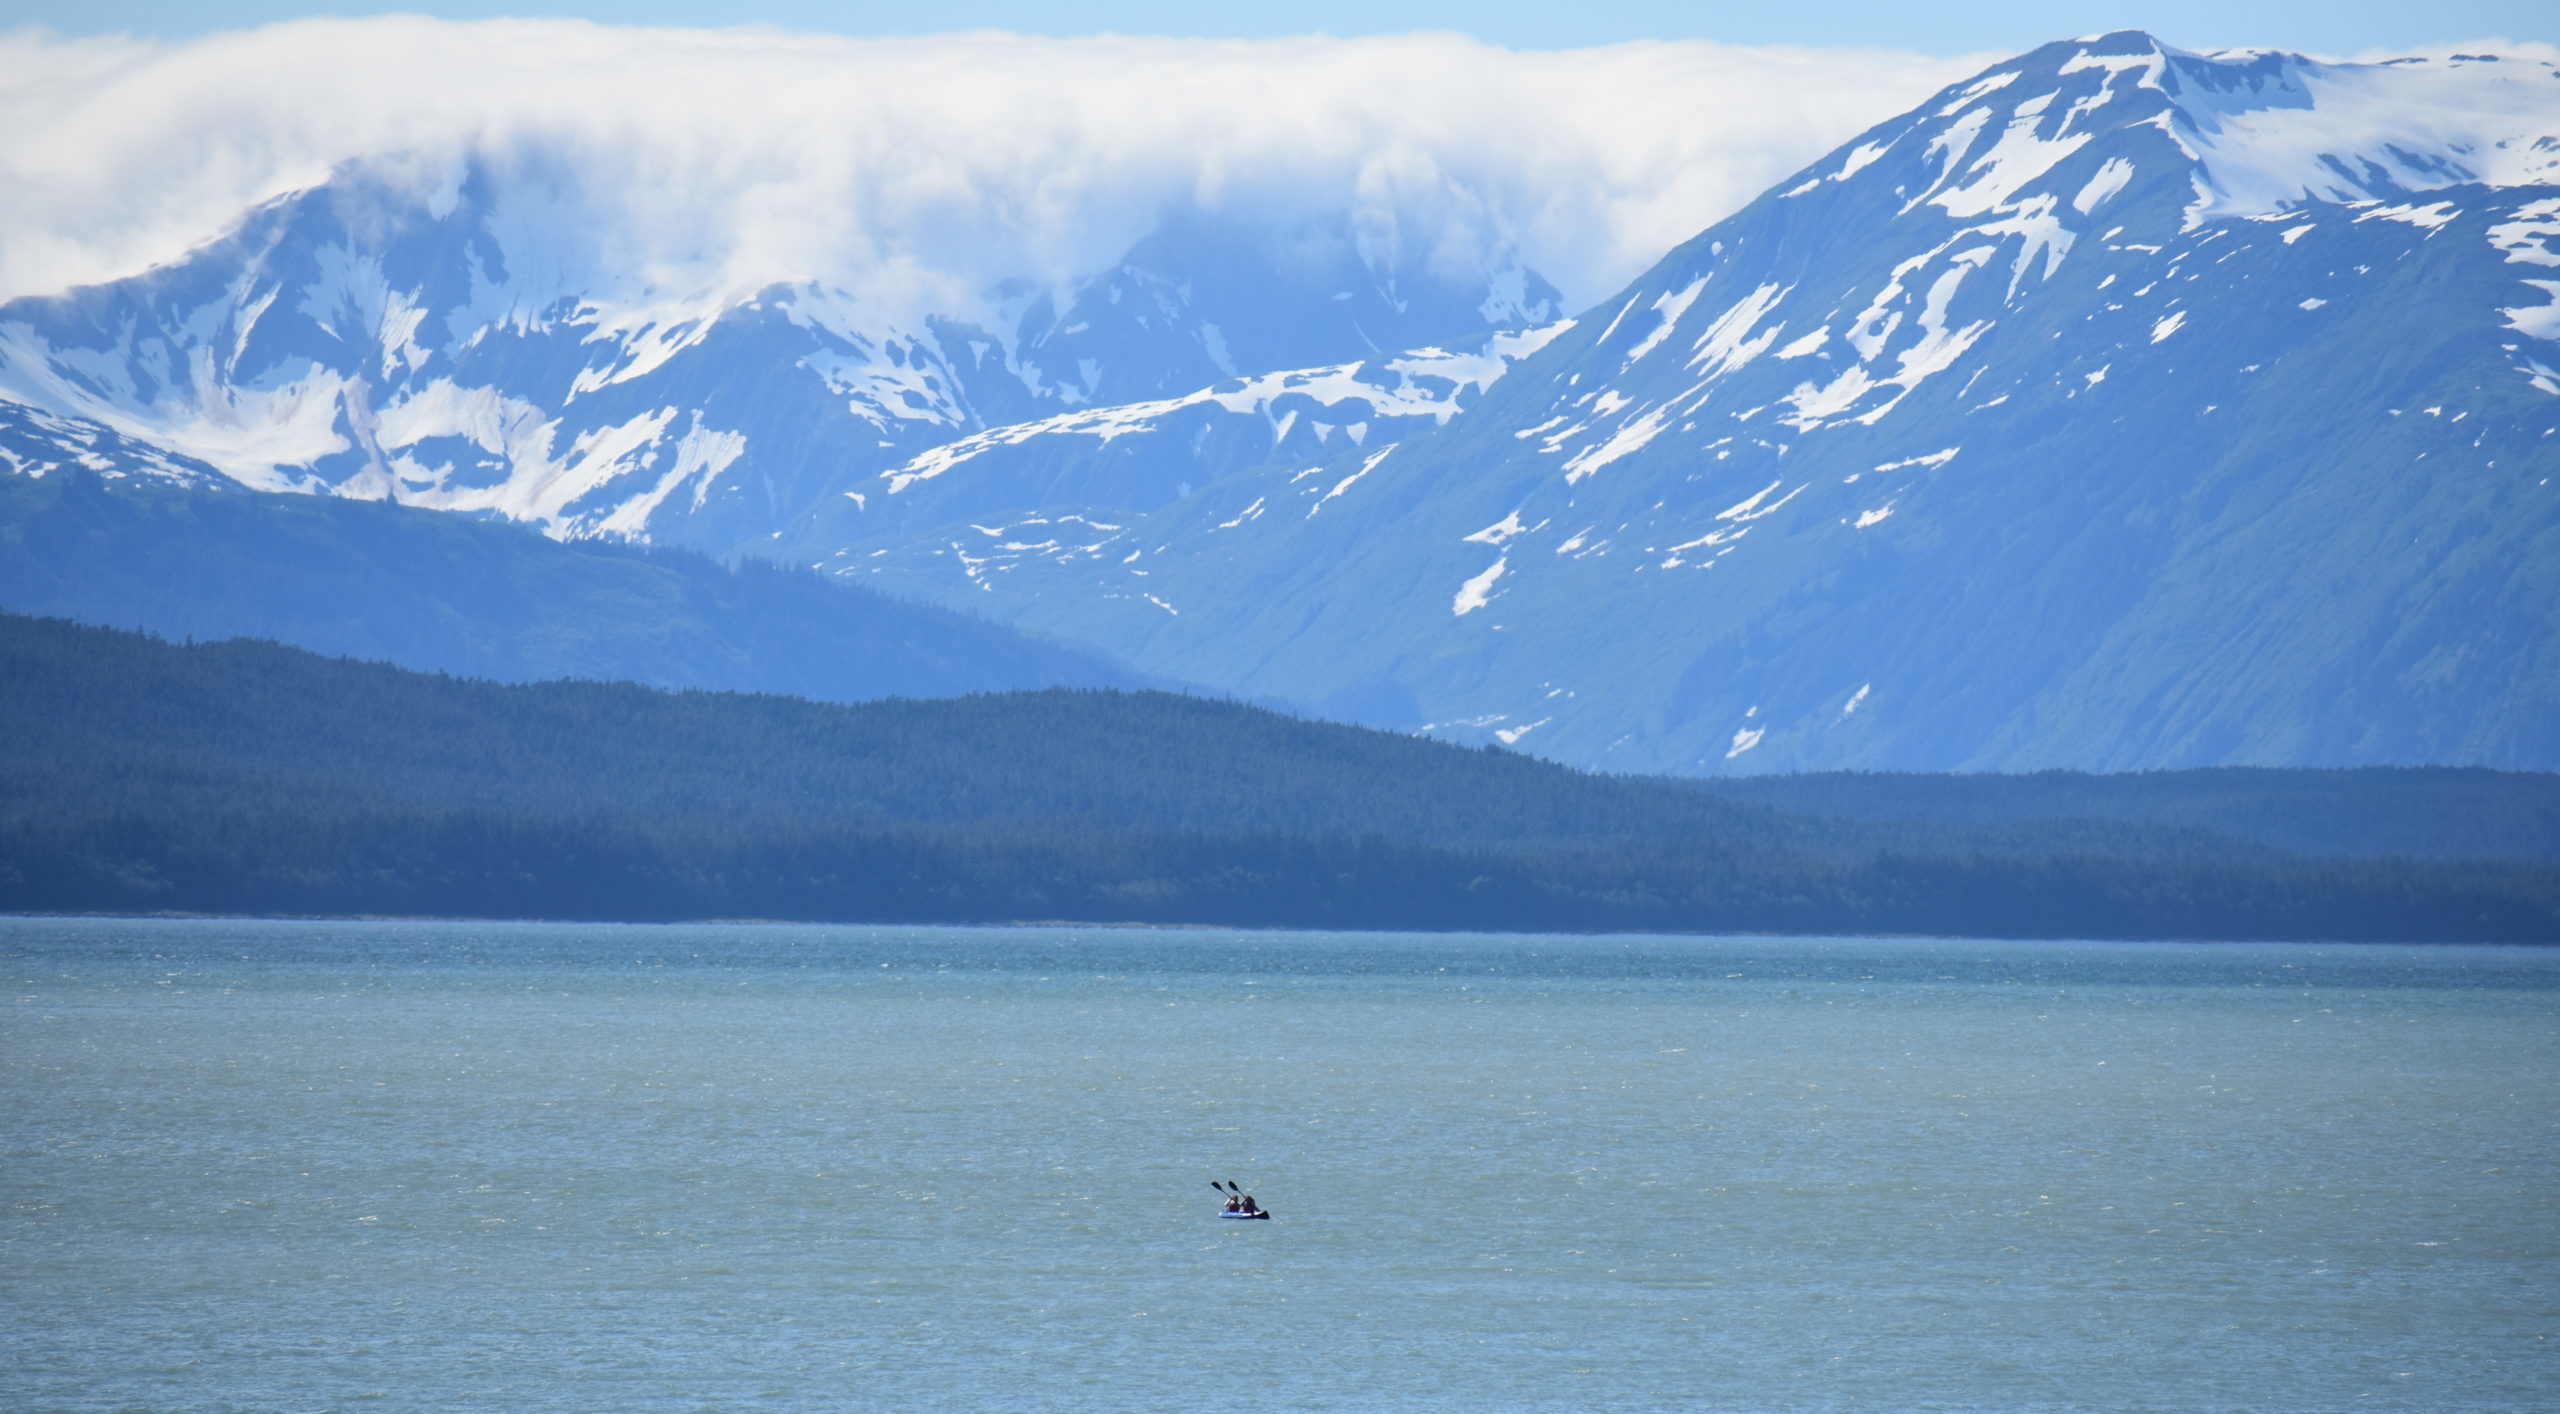 A kayak out in the distance with mountains in the background